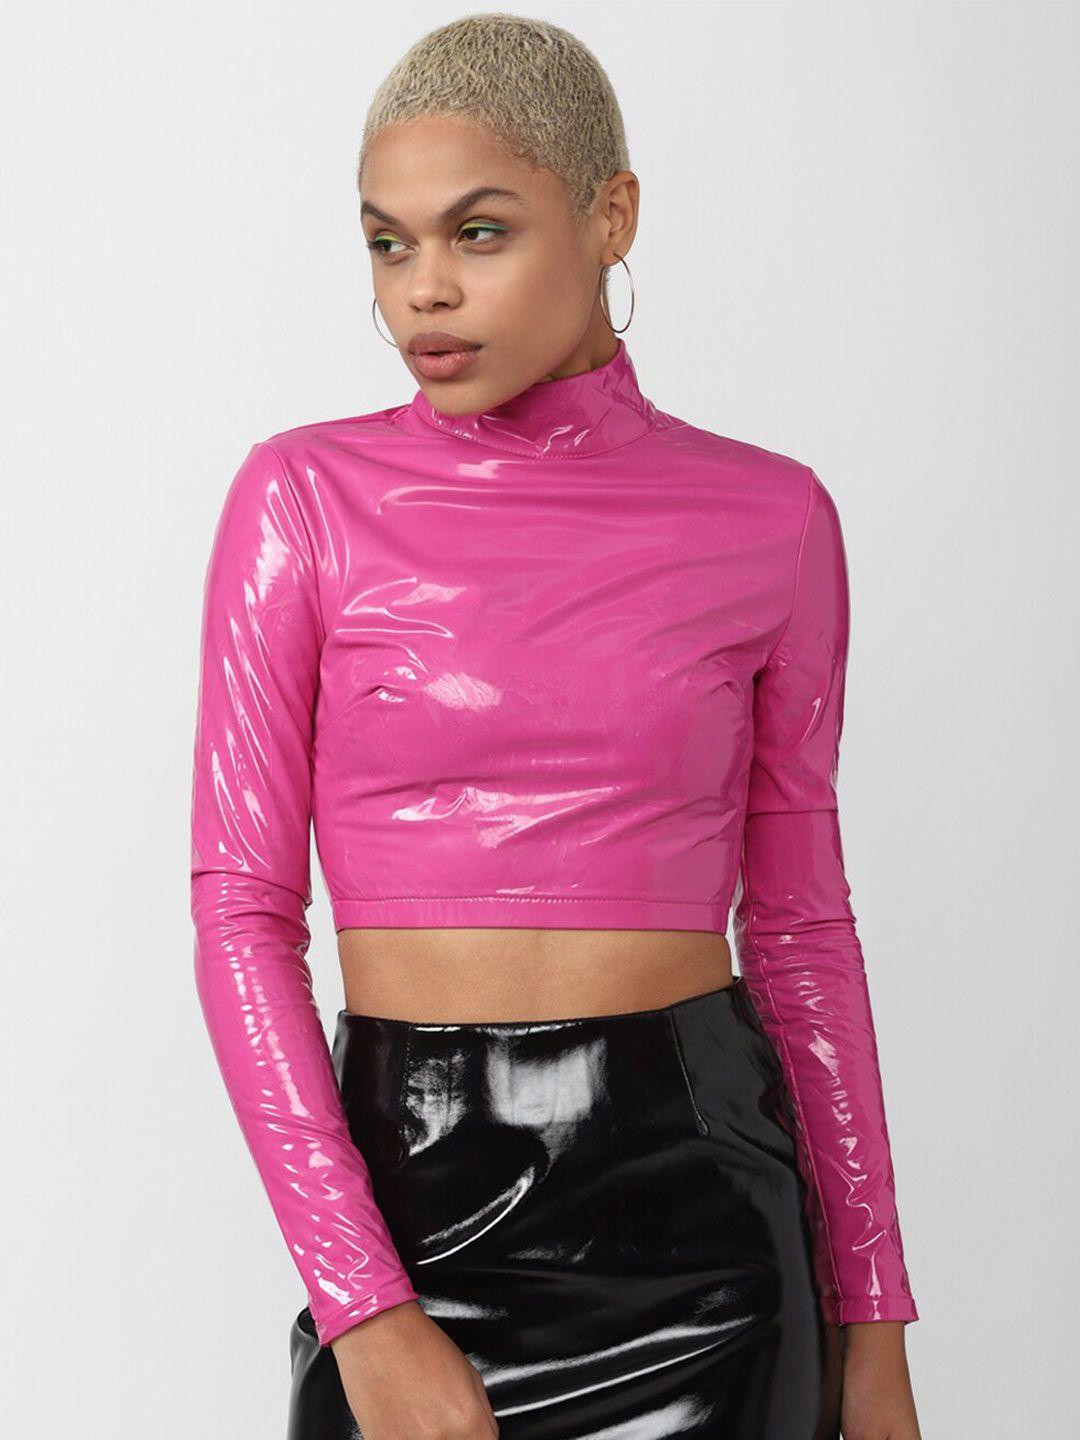 forever 21 high neck fitted crop top